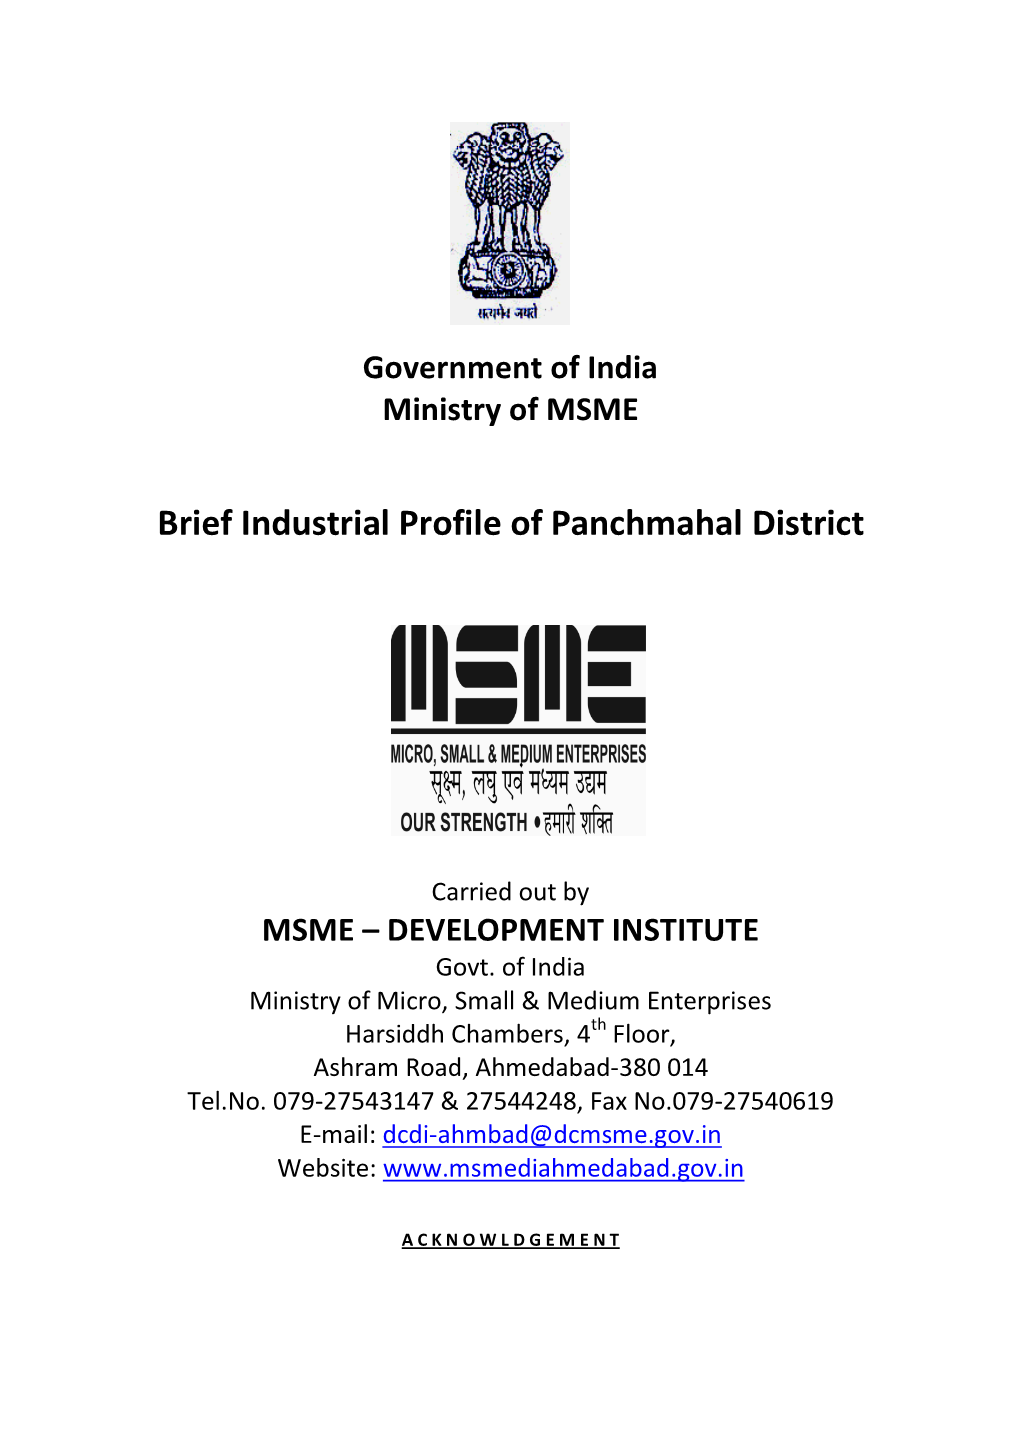 Brief Industrial Profile of Panchmahal District